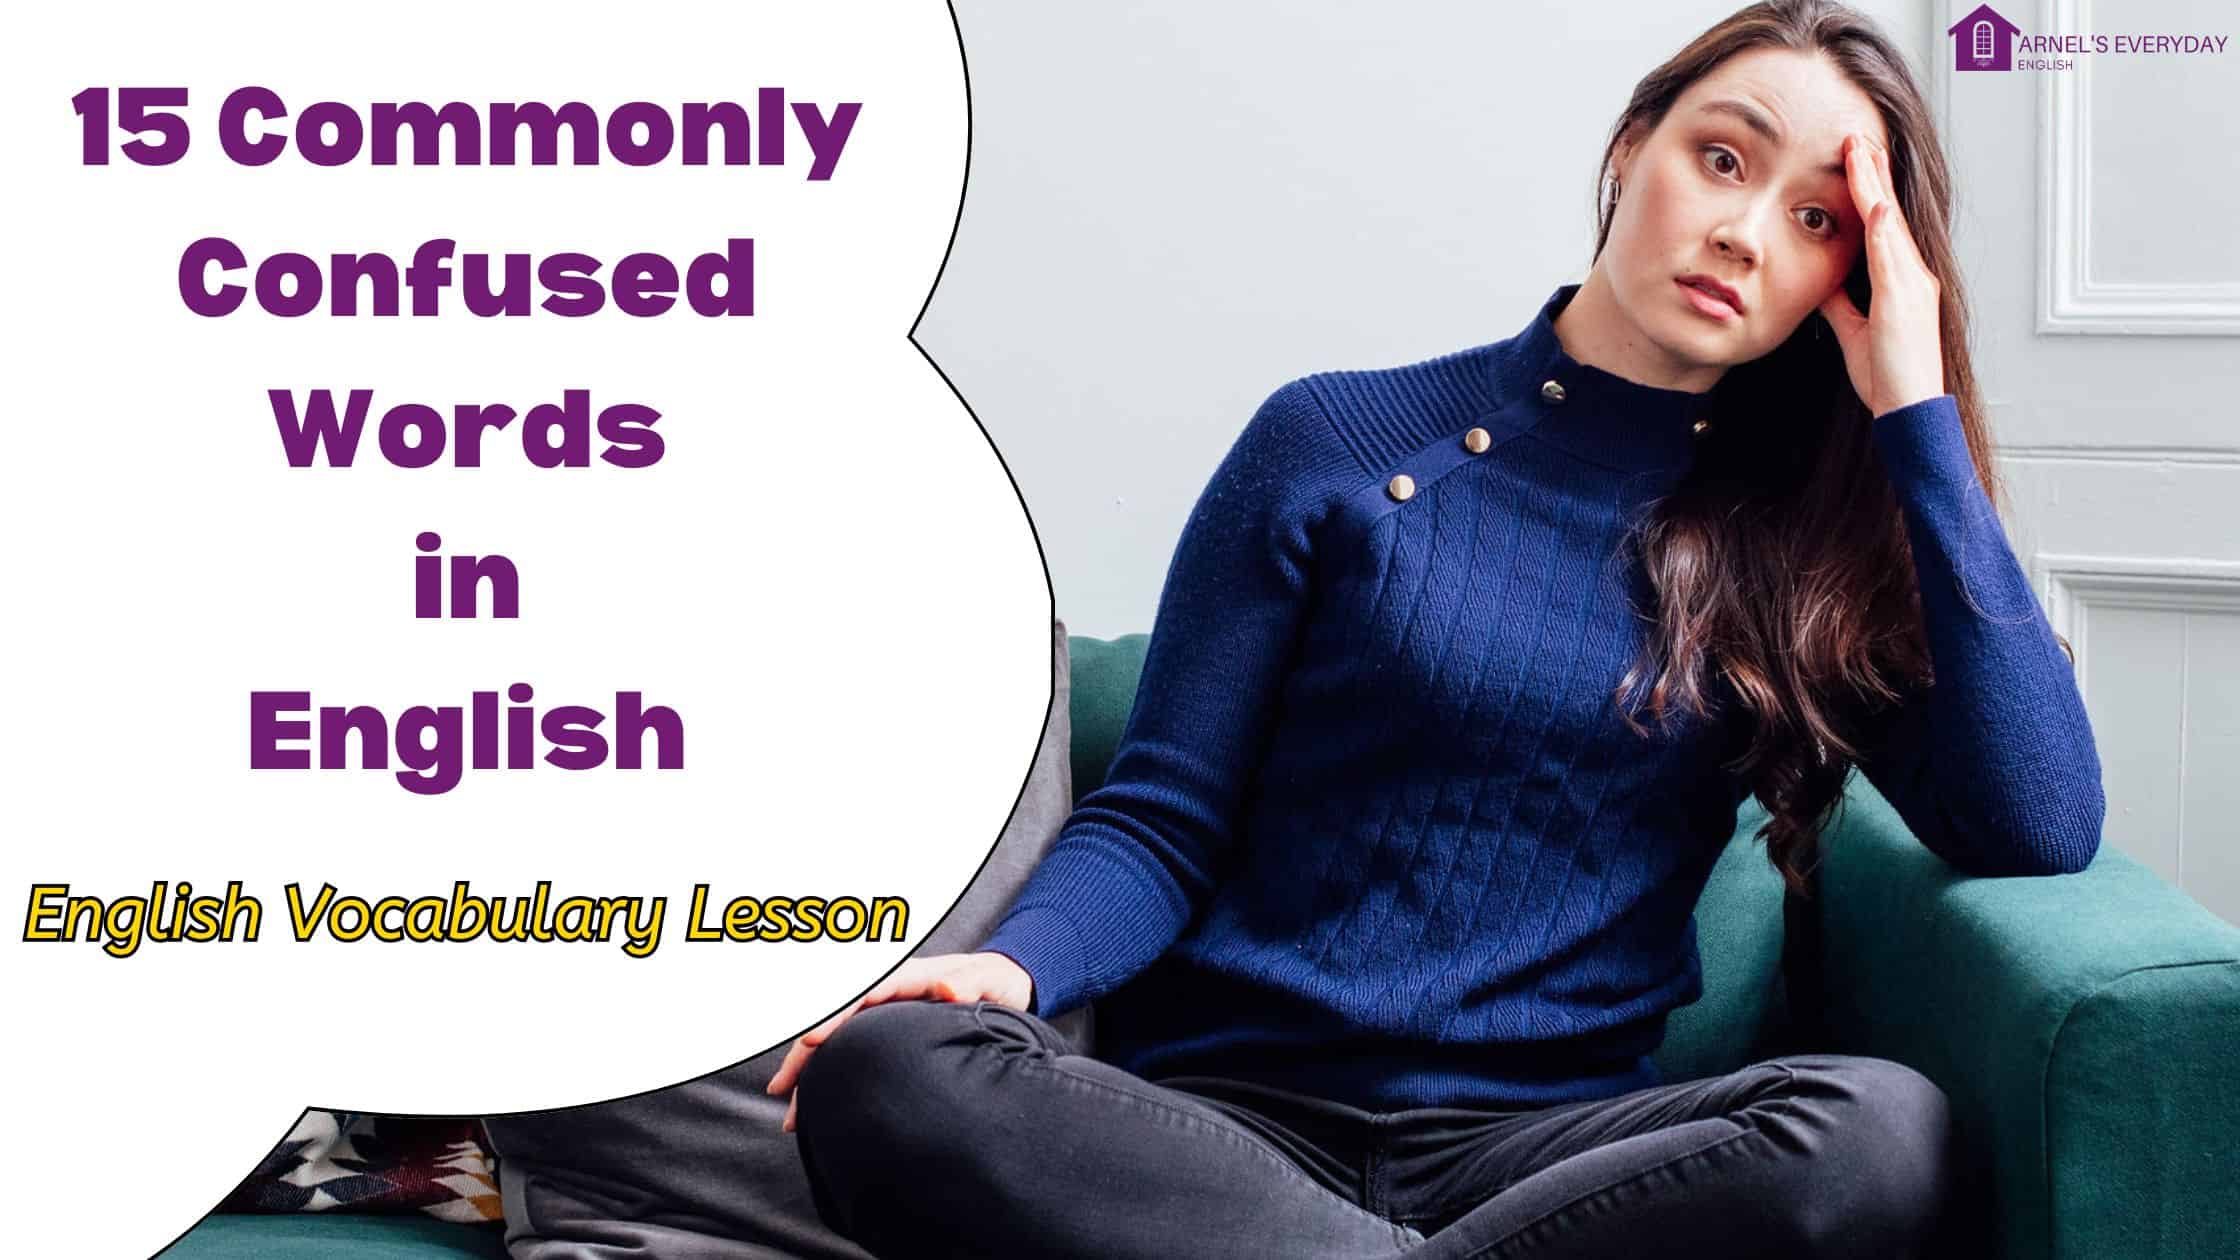 15 Commonly Confused Words in English – English Vocabulary